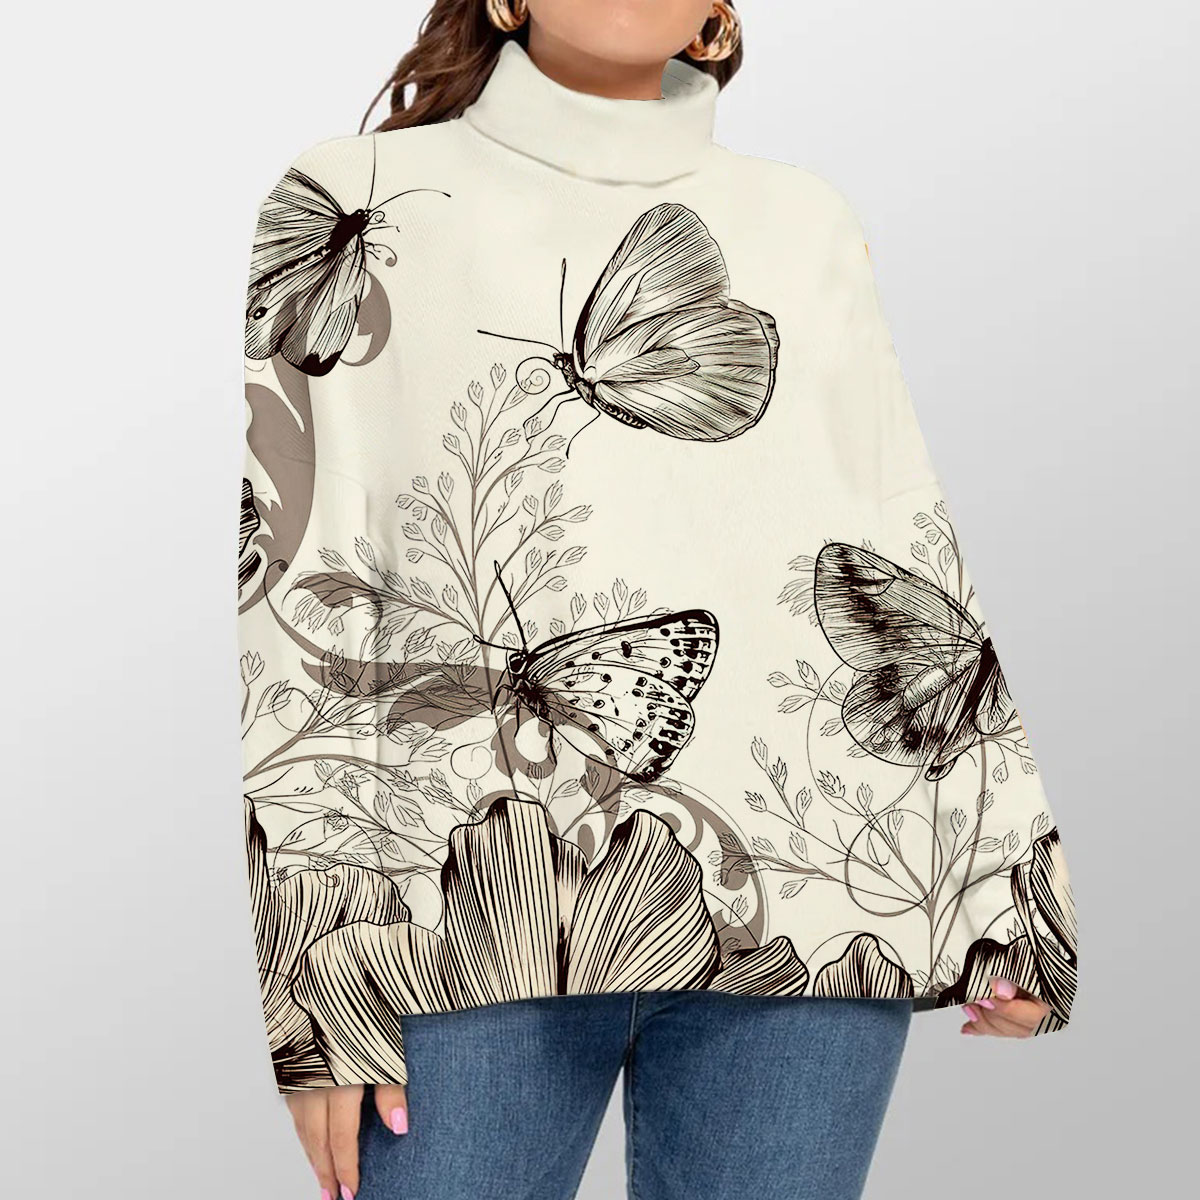 Flower And Butterfly Turtleneck Sweater